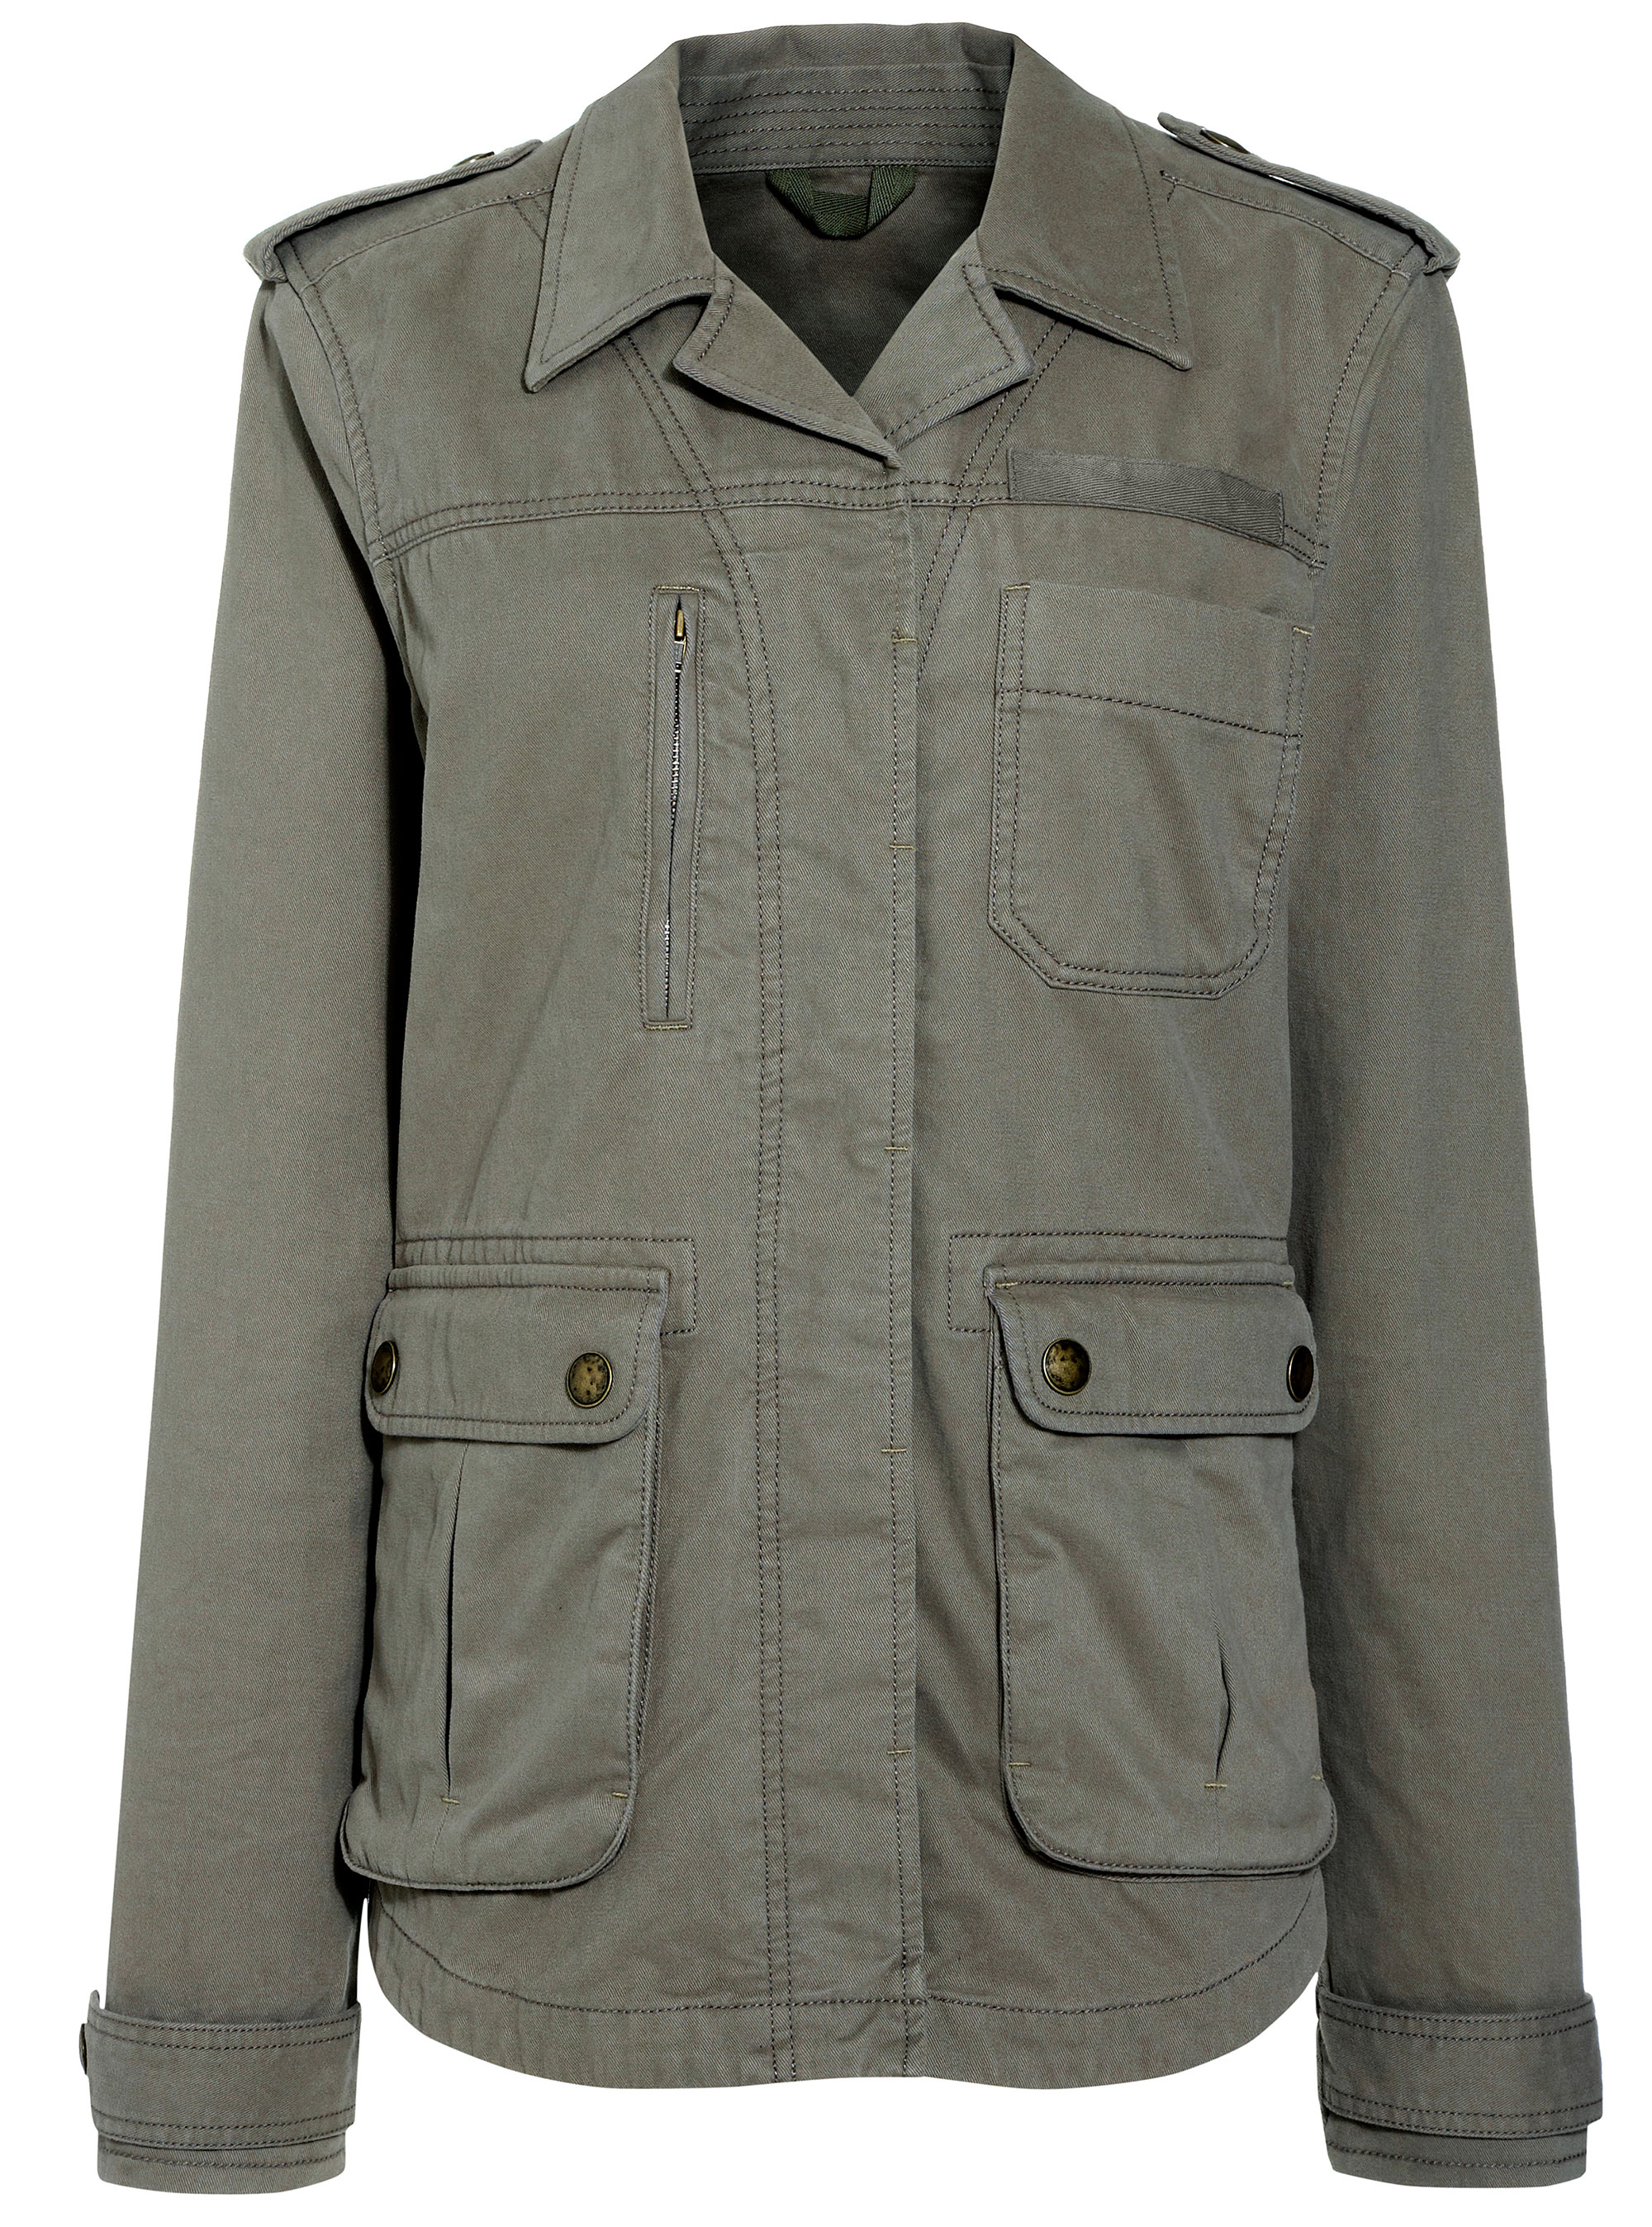 Mango classic cotton trench coat, £69 - spring coats - Woman And Home